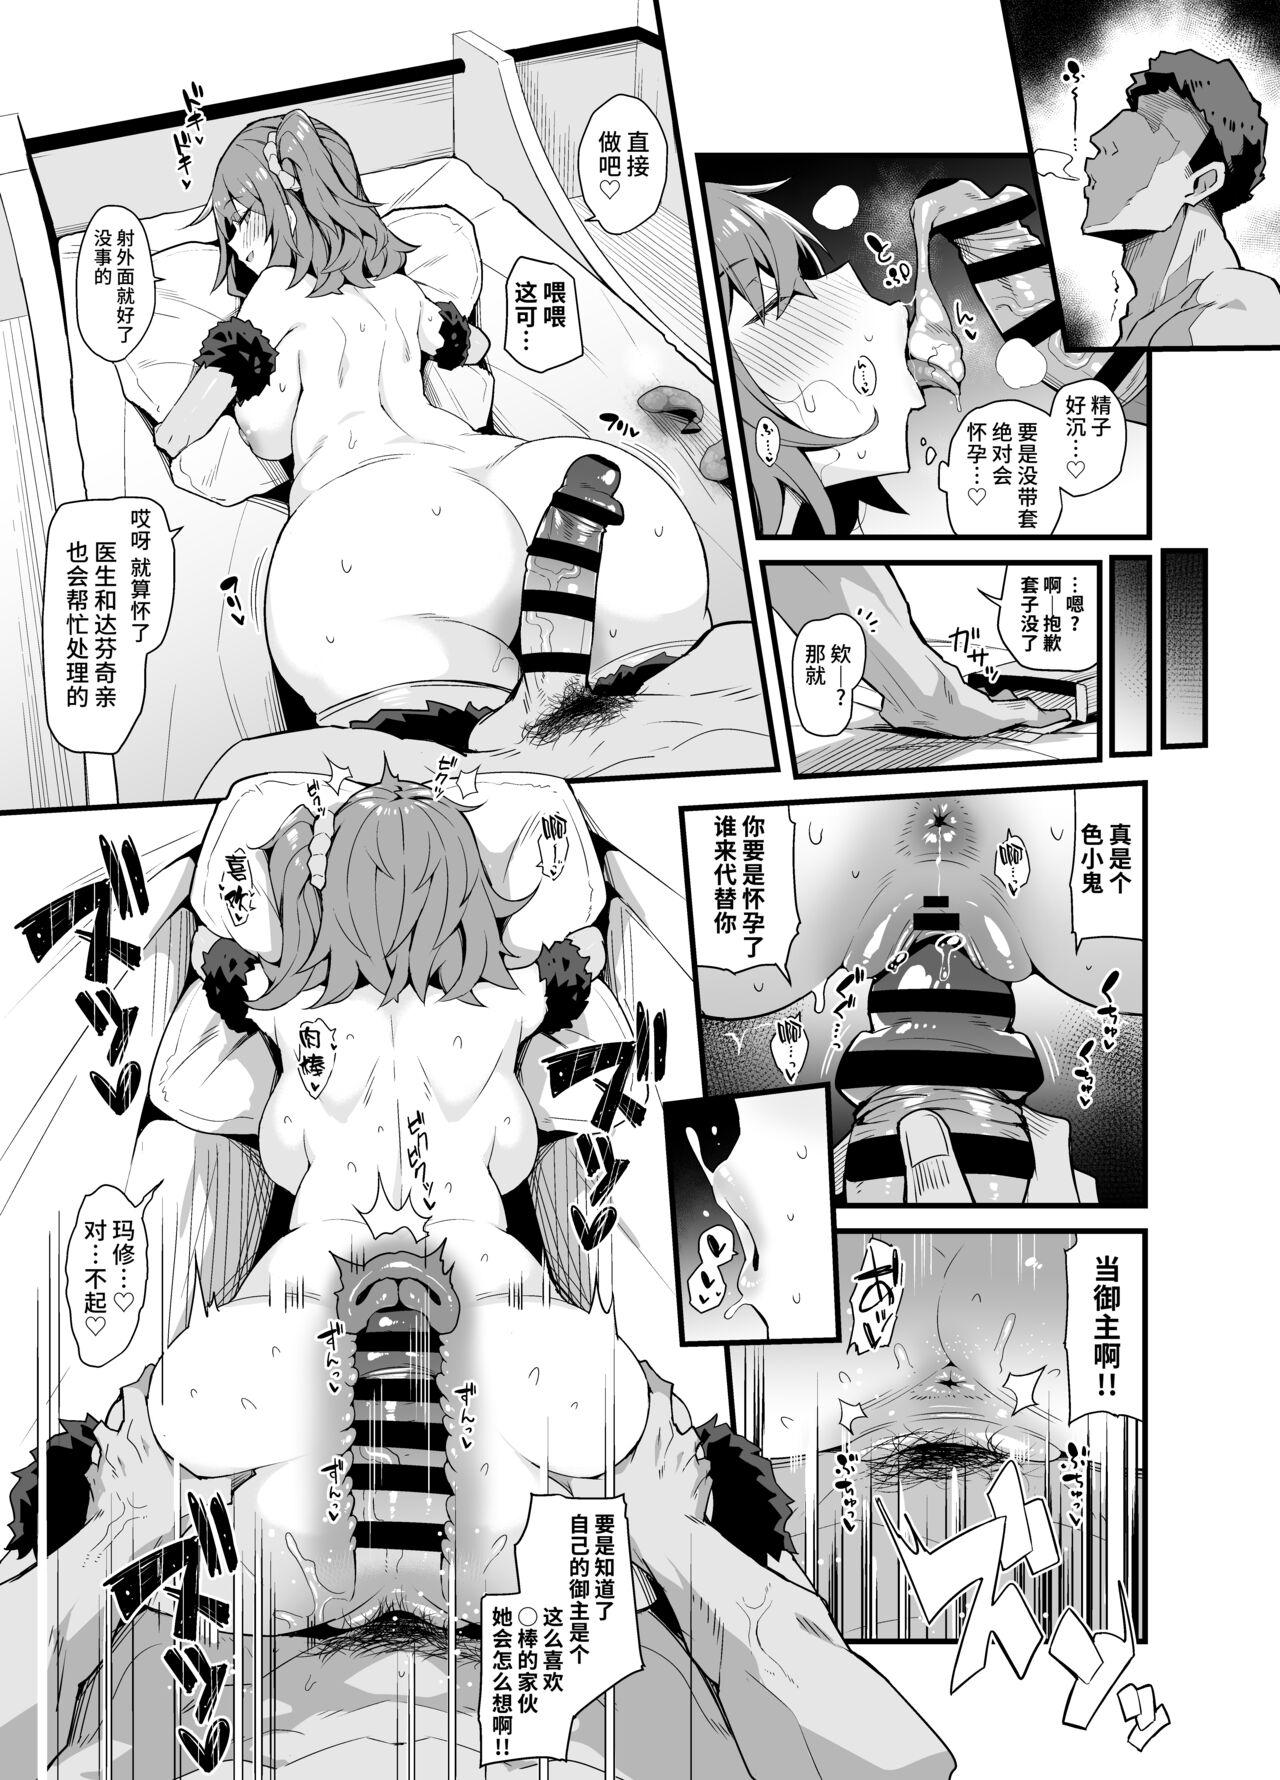 Transsexual 寝バック膣内射精 - Fate grand order Nasty - Page 3